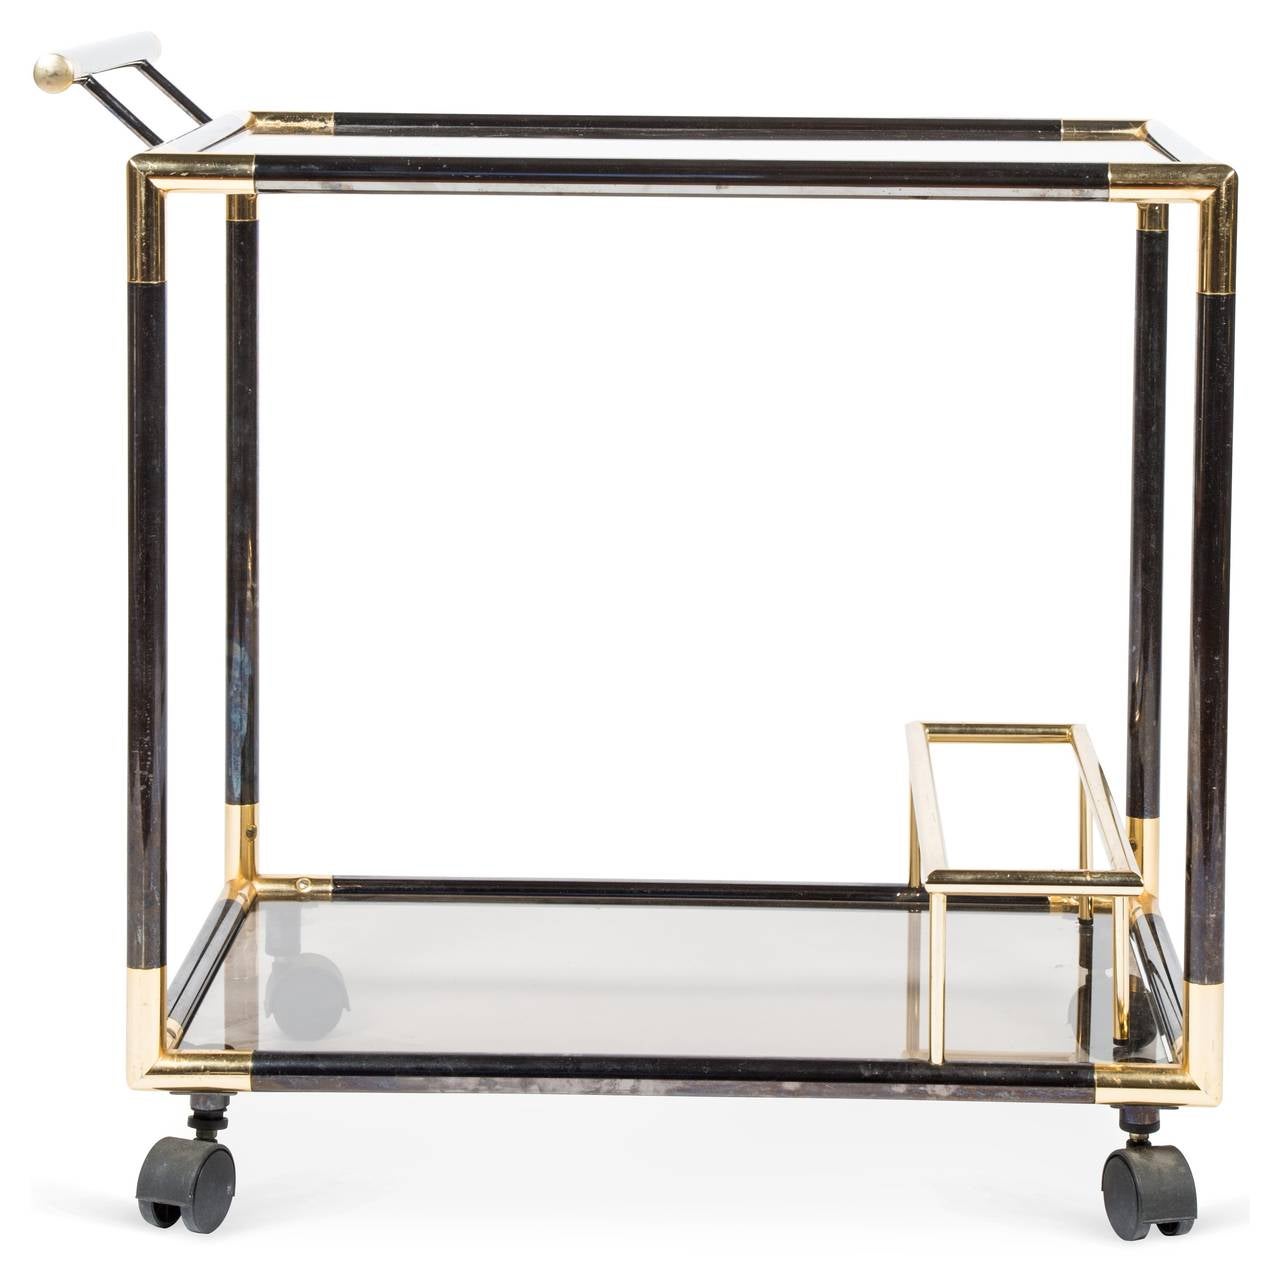 Mid Century Italian tubular tea/bar serving cart featuring a smoked metal frame with brass details.  Two removable smoked glass inserts, bottle holder, and casters.